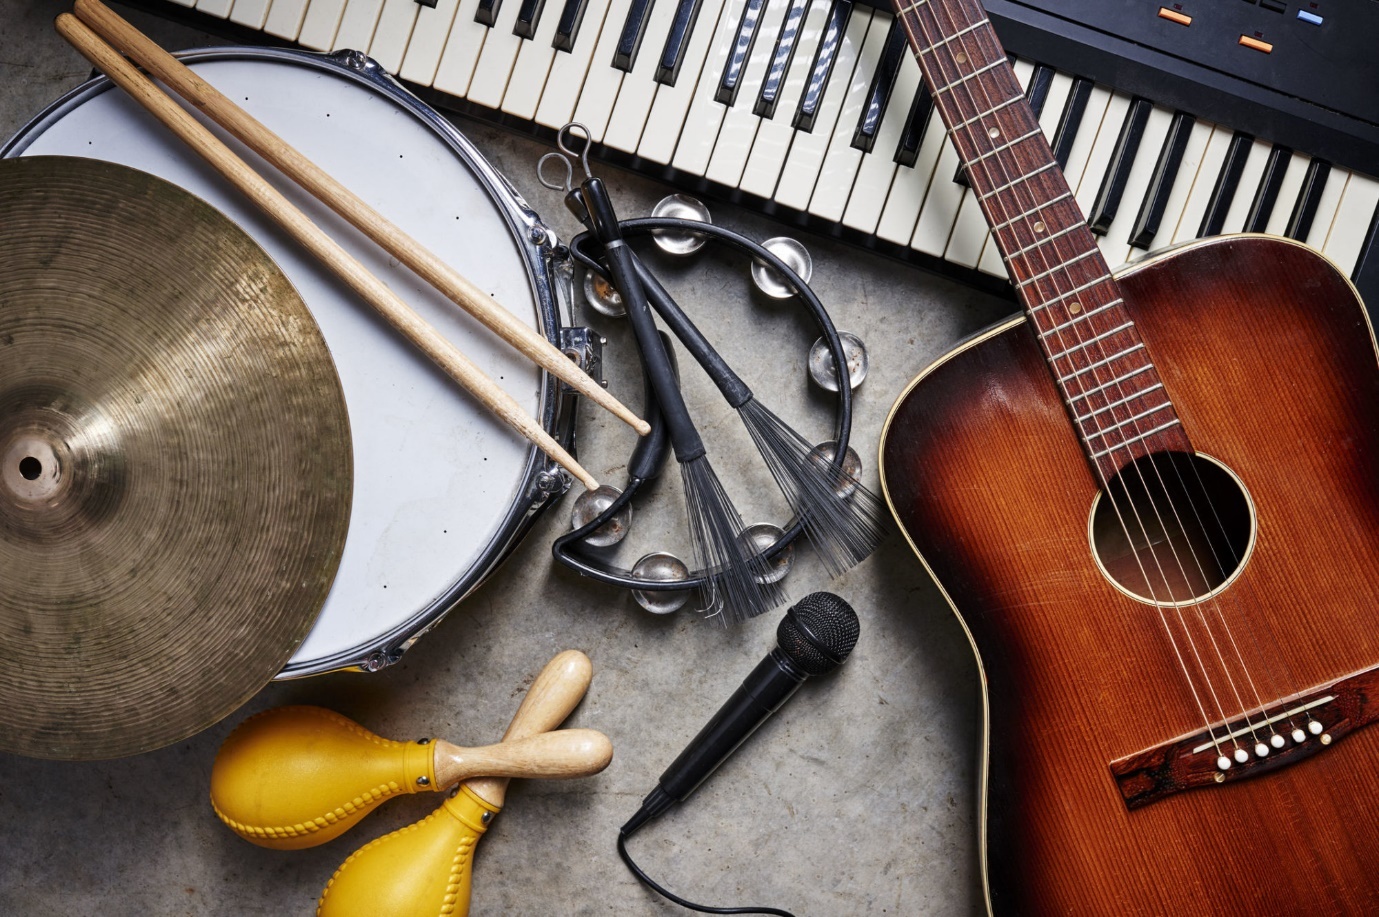 Harmonious melodies: buying musical instruments and accessories on a bulletin board in Israel